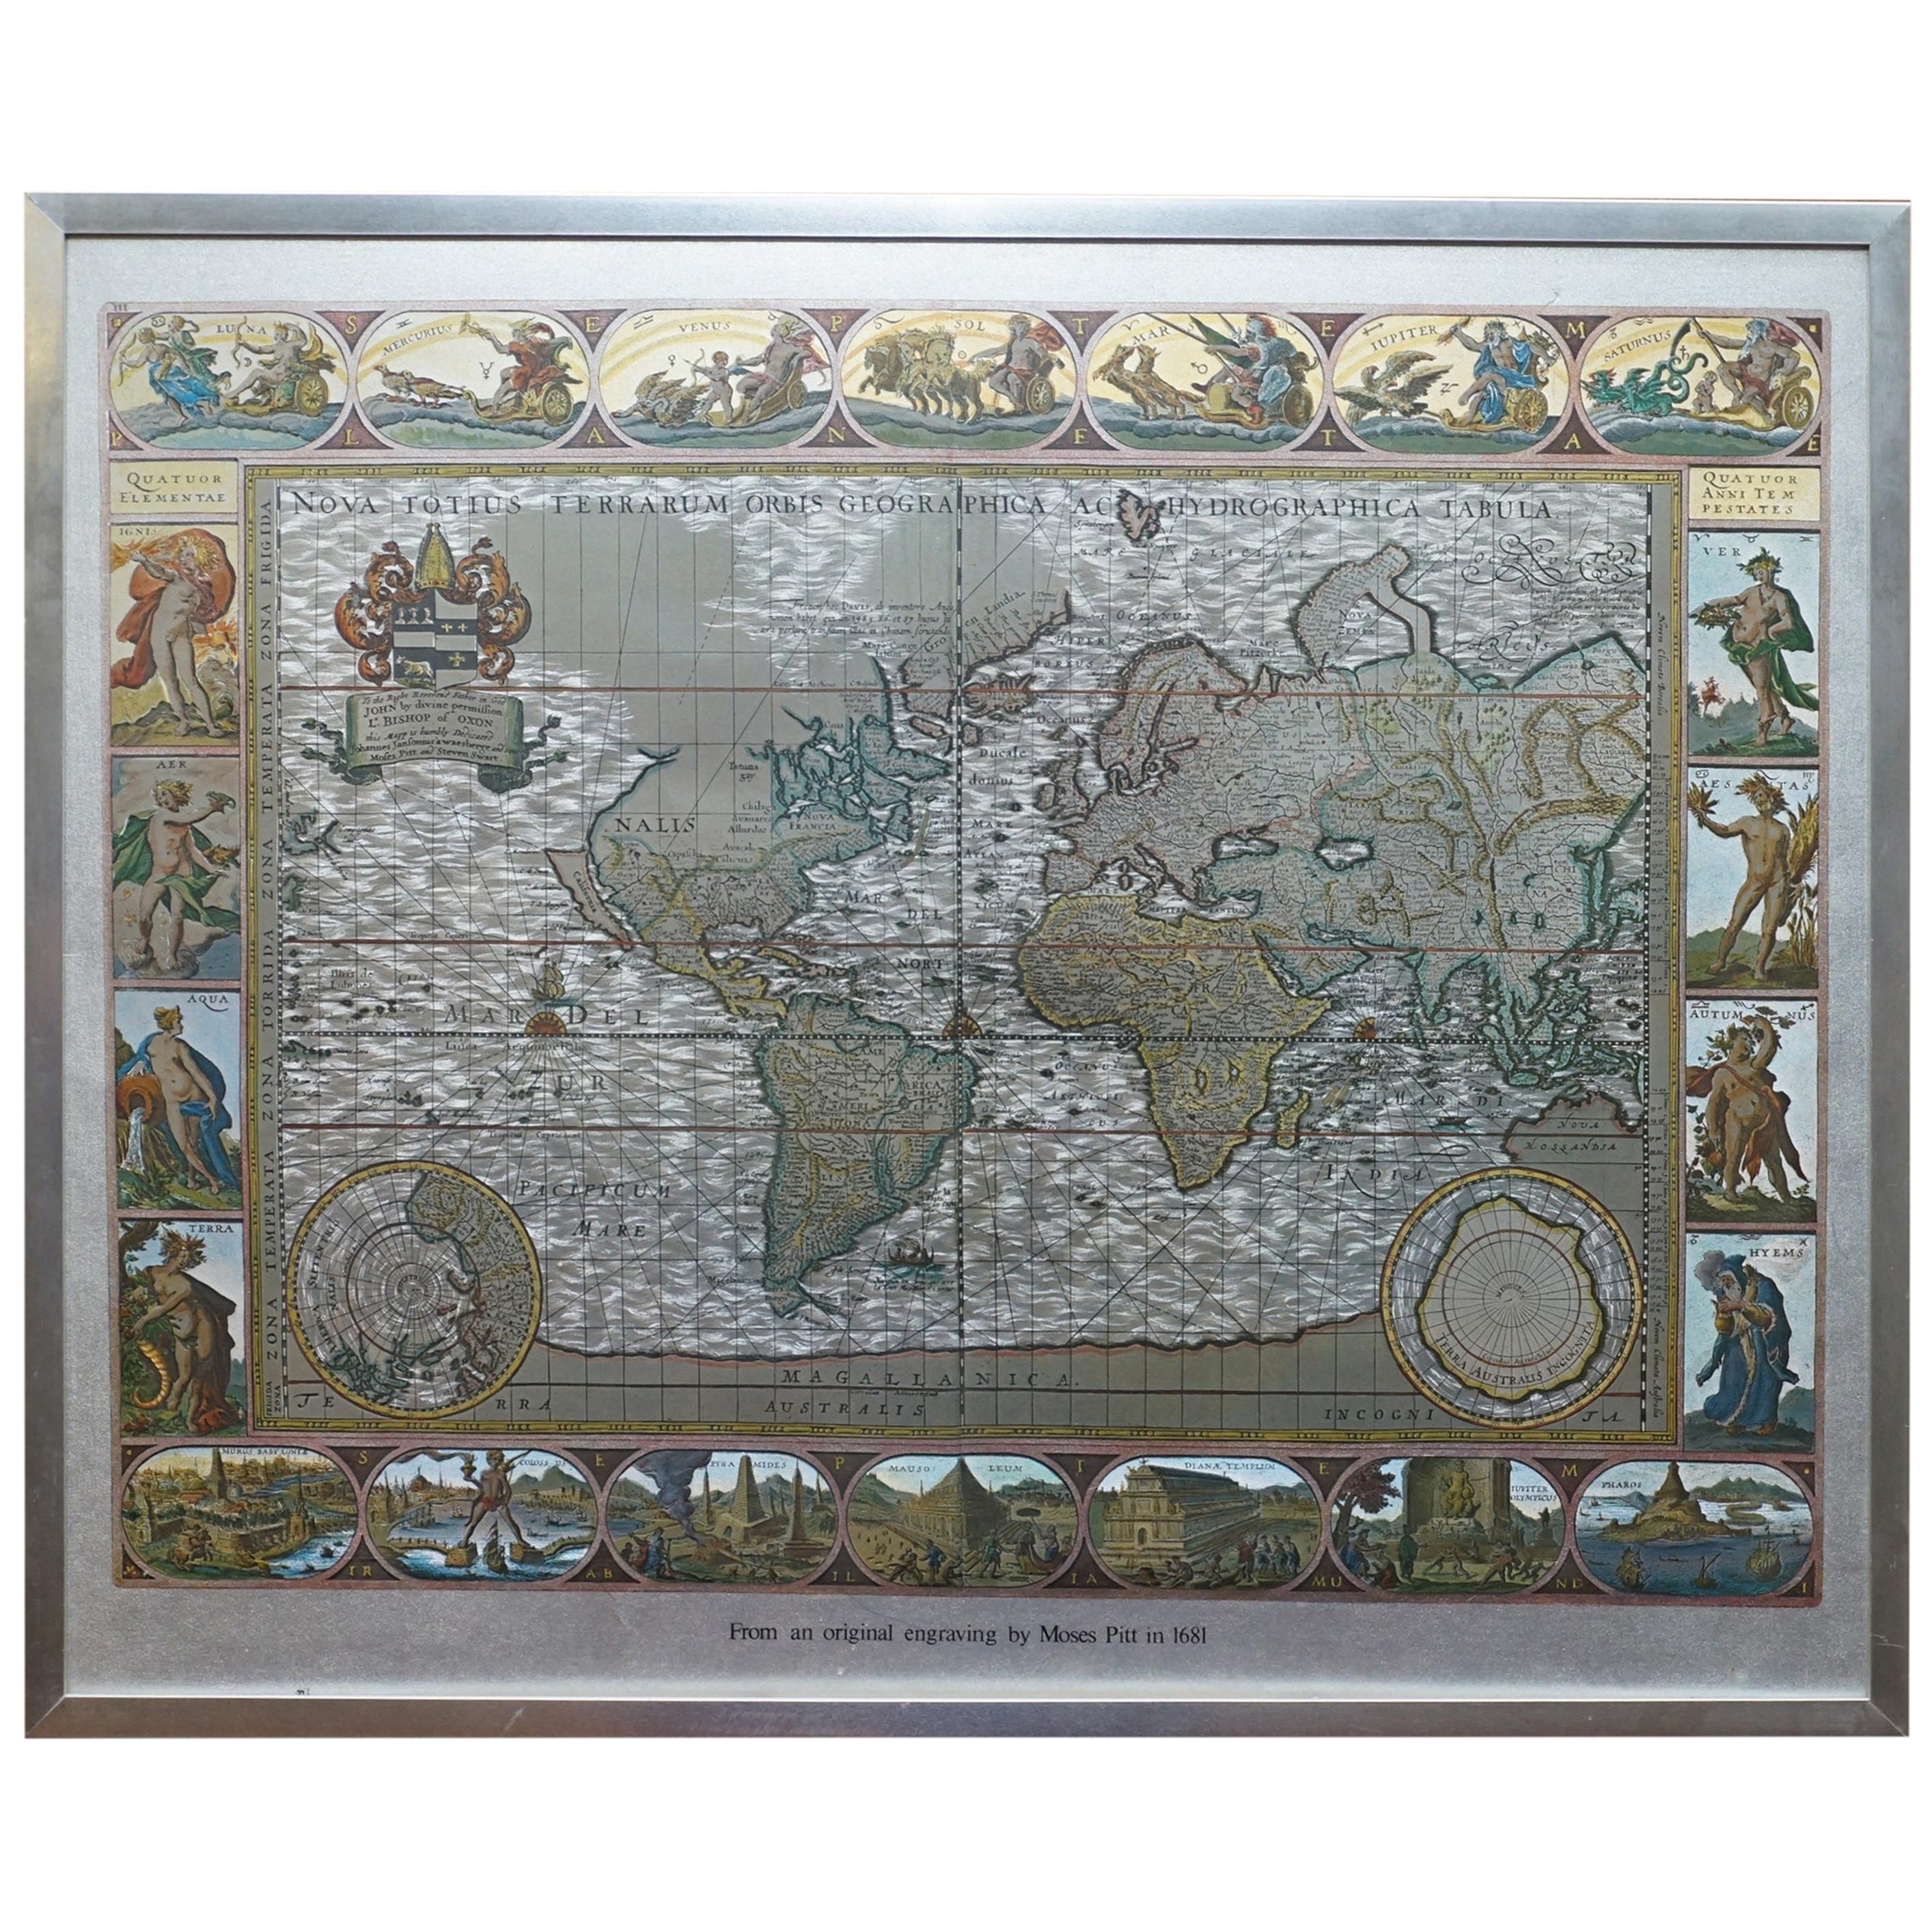 Silver Leaf Foil Wall World Map Engraving Based on the Original Moses Pitt, 1681